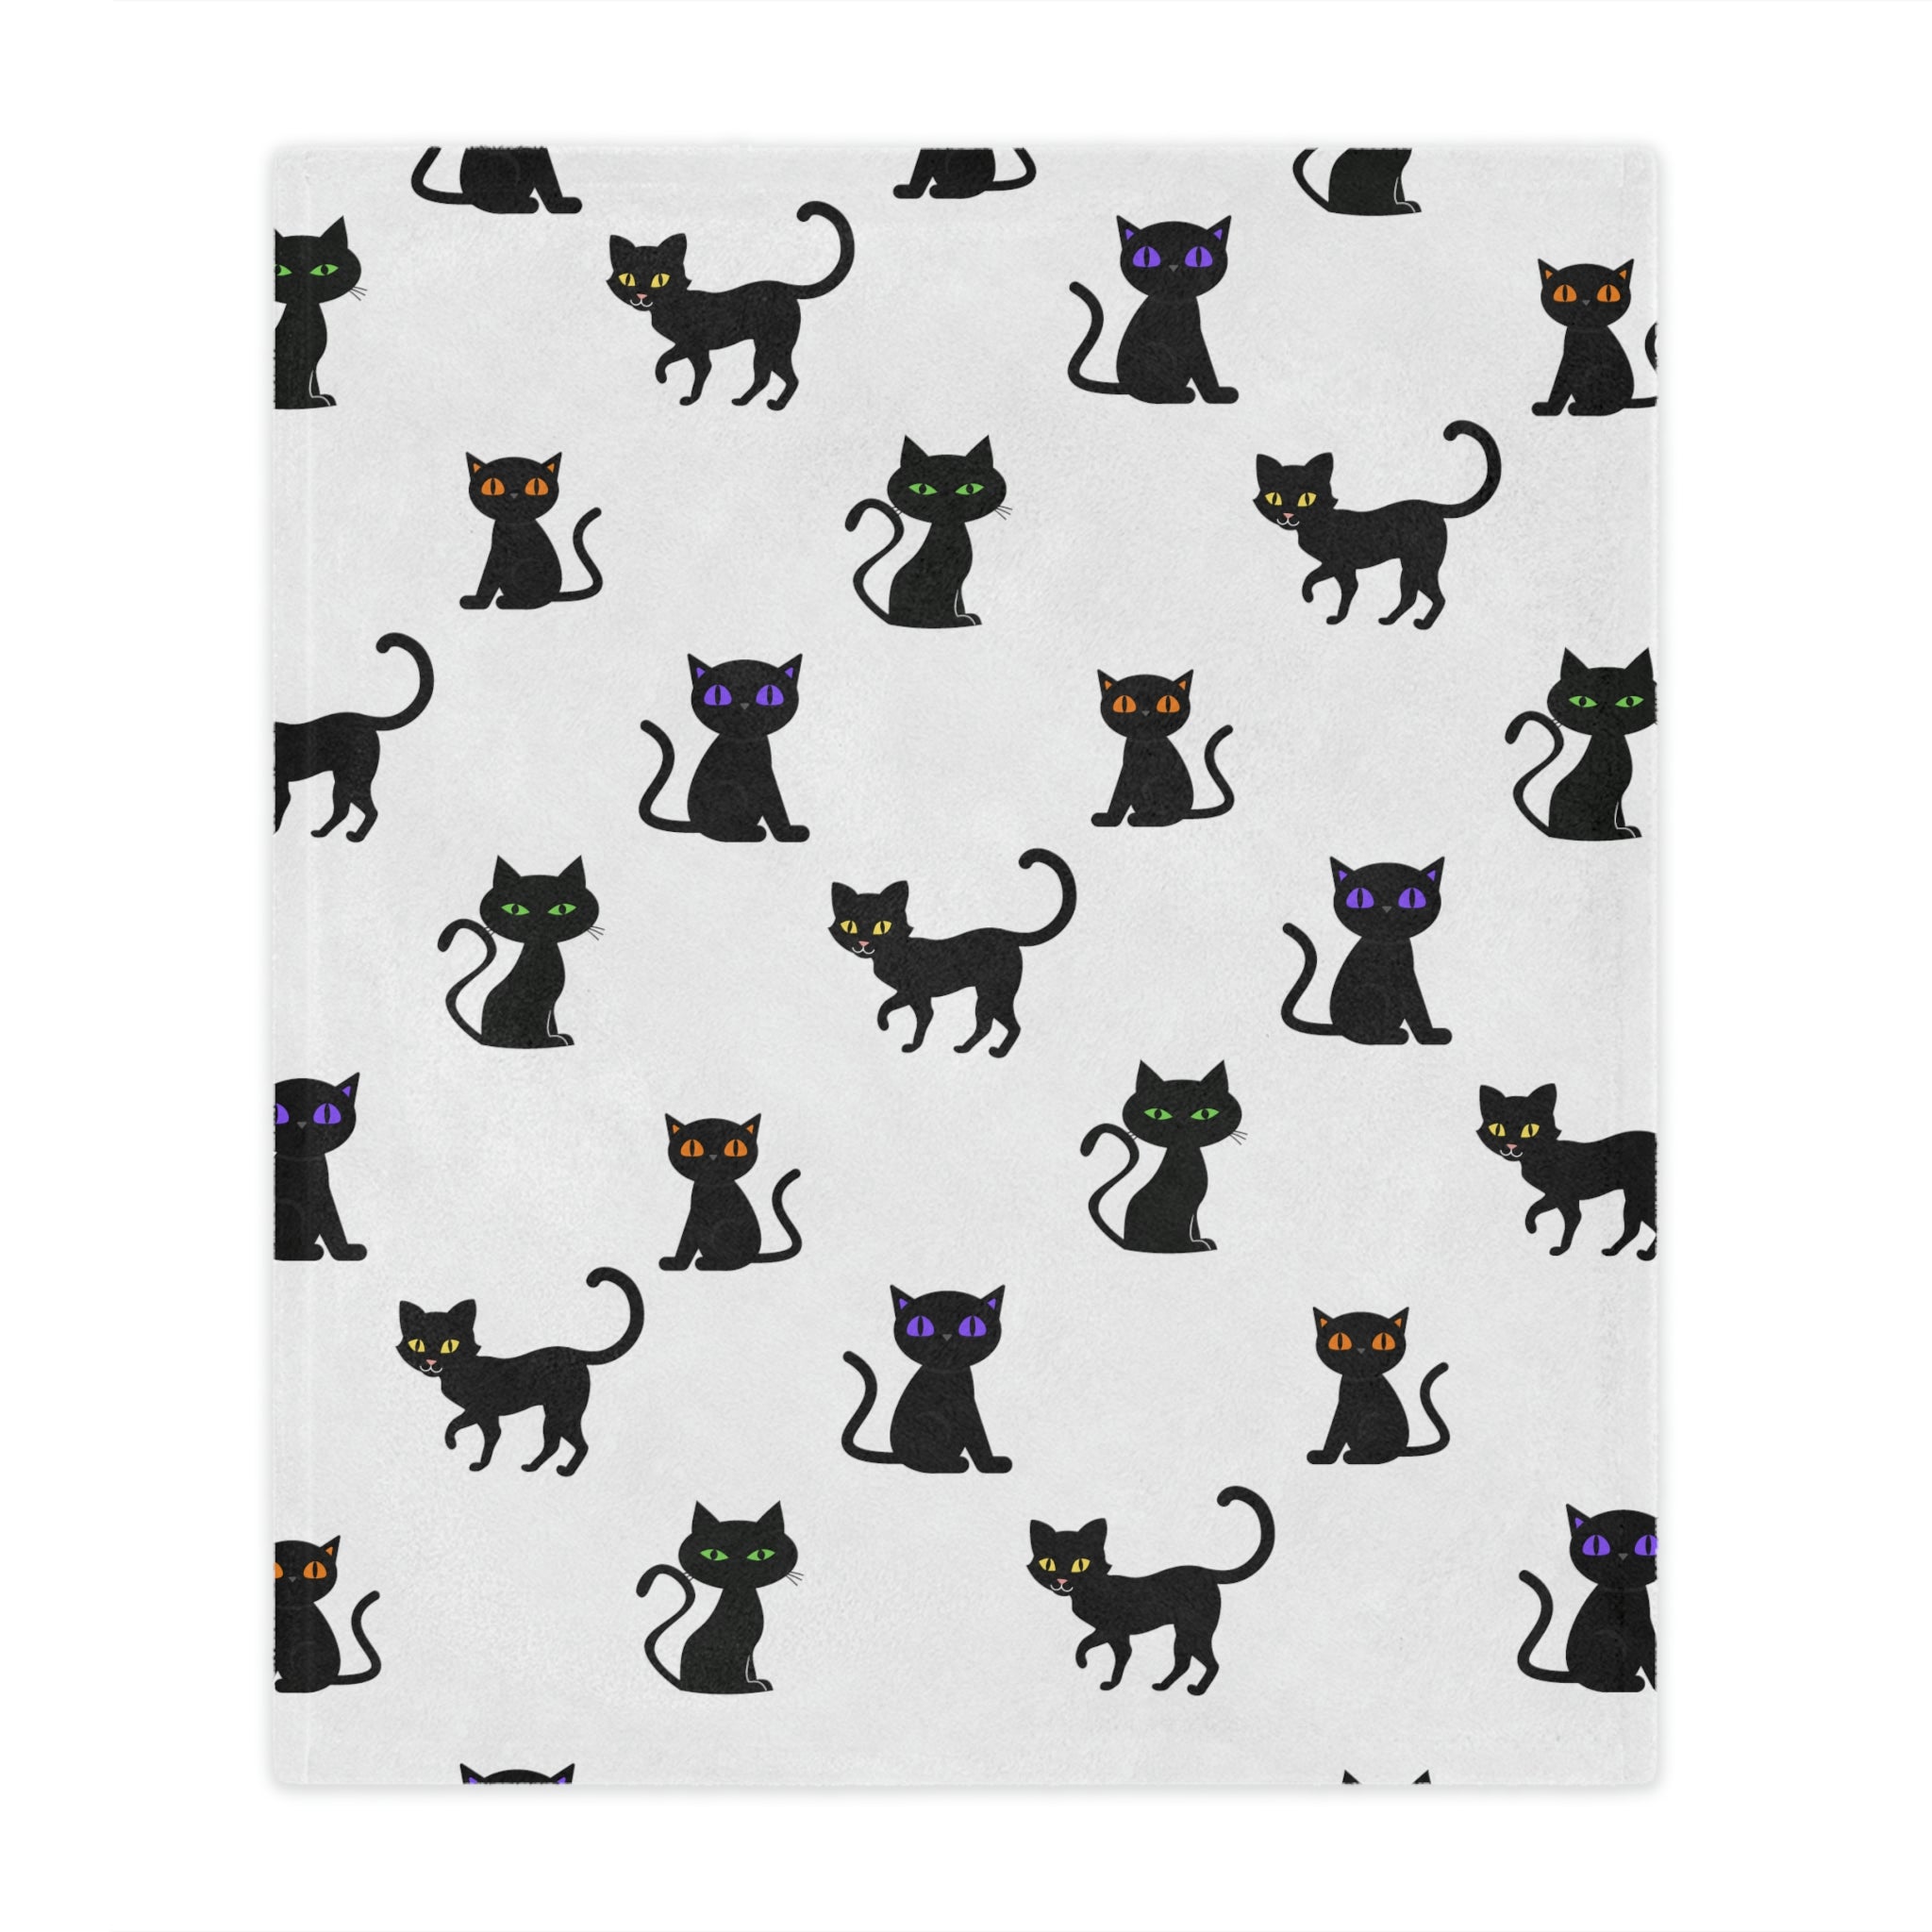 Black Cat Throw Blanket, White Minky, Kids or Adult Size - Durazza